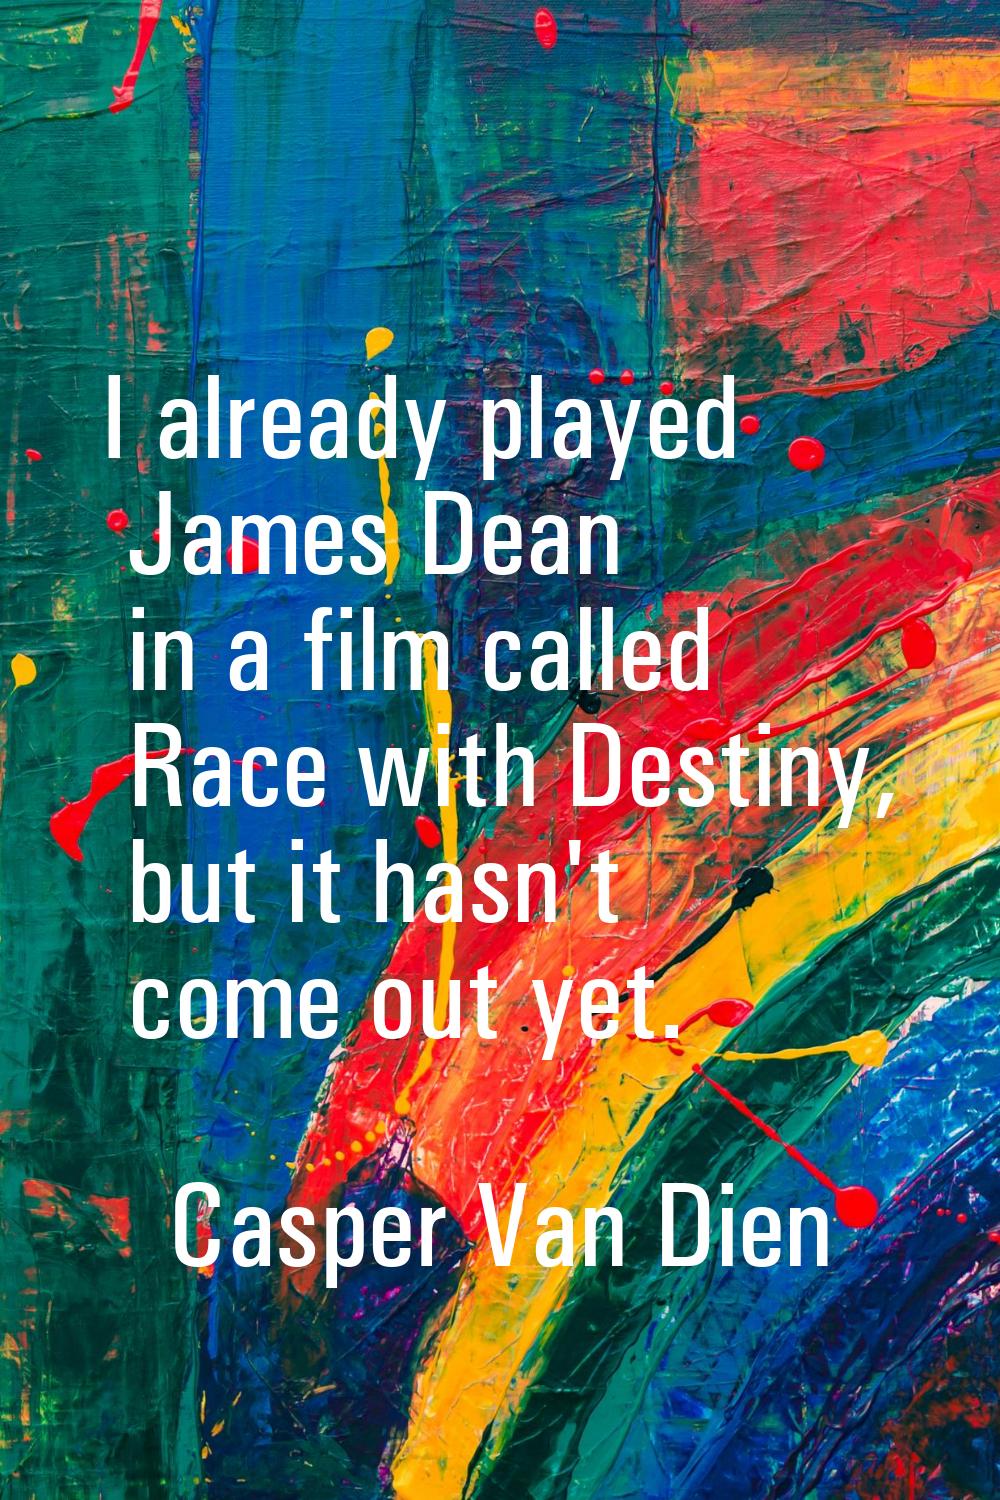 I already played James Dean in a film called Race with Destiny, but it hasn't come out yet.